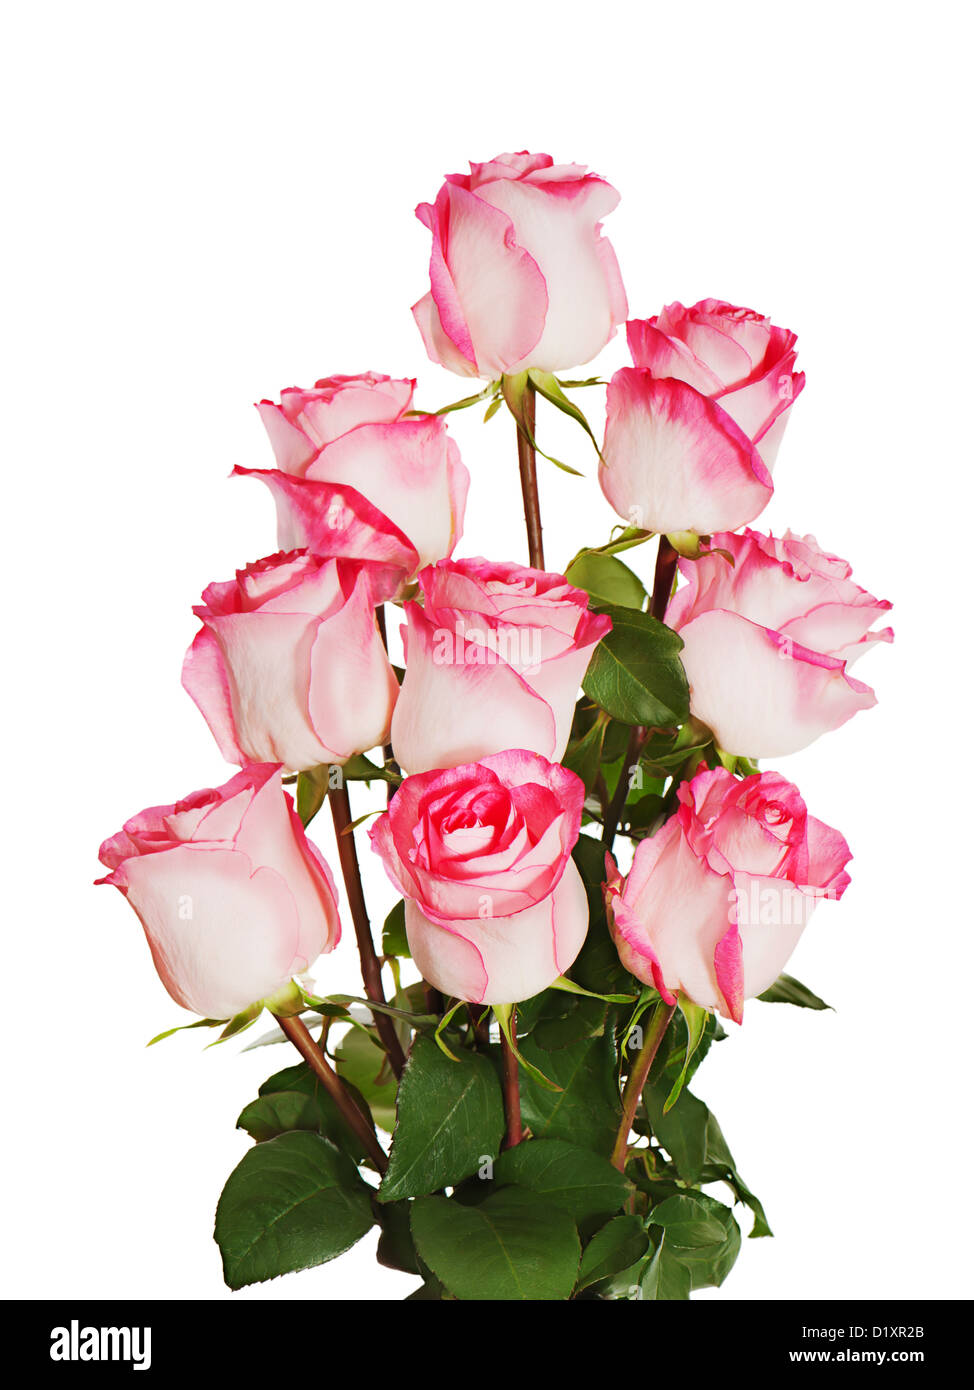 colorful flower bouquet from roses isolated on white background Stock Photo